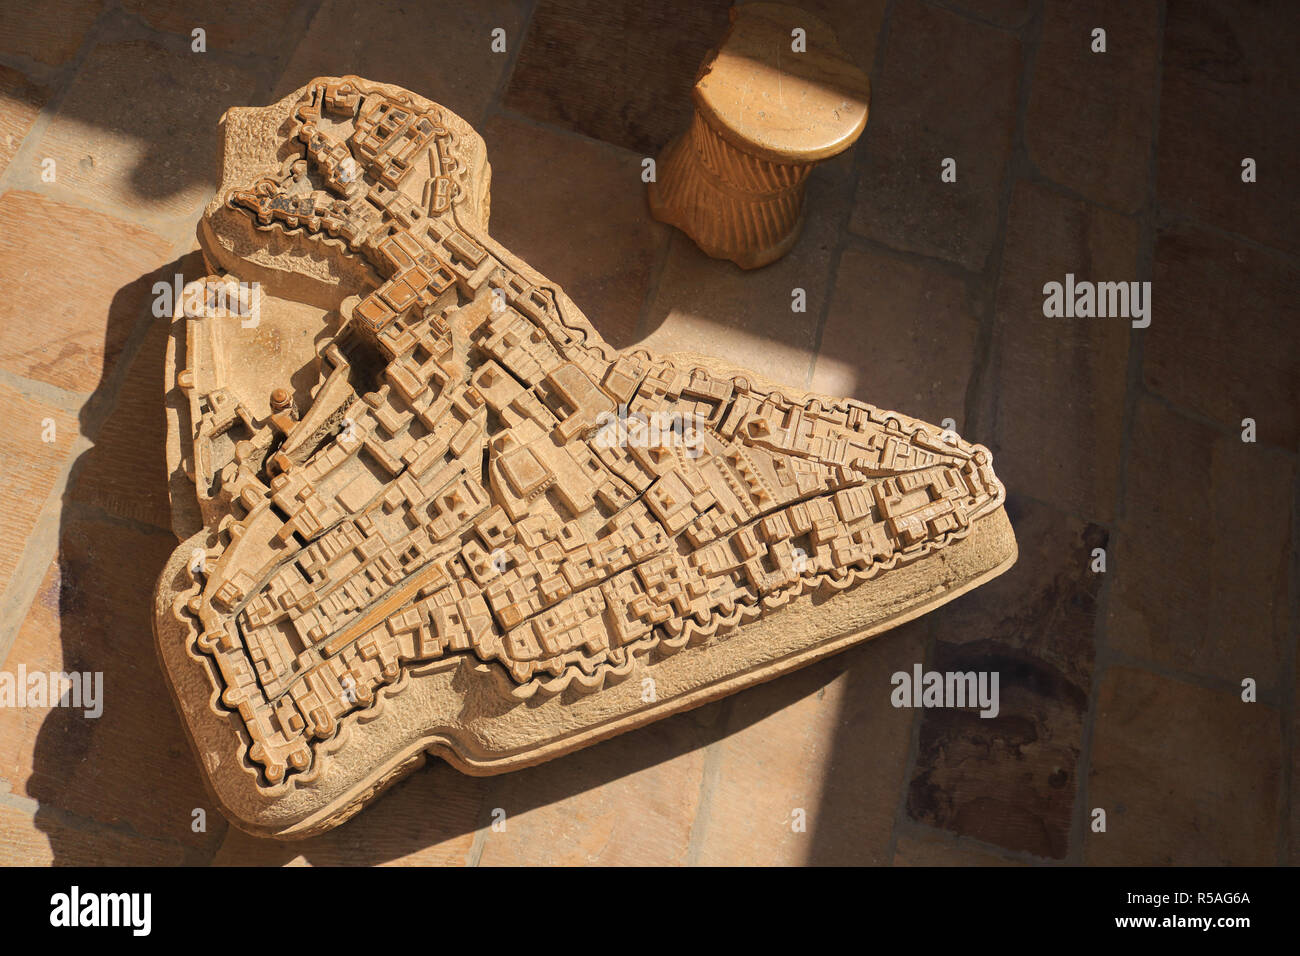 Ancient map of Golden Fort of Jaisalmer carving on stone. Stock Photo